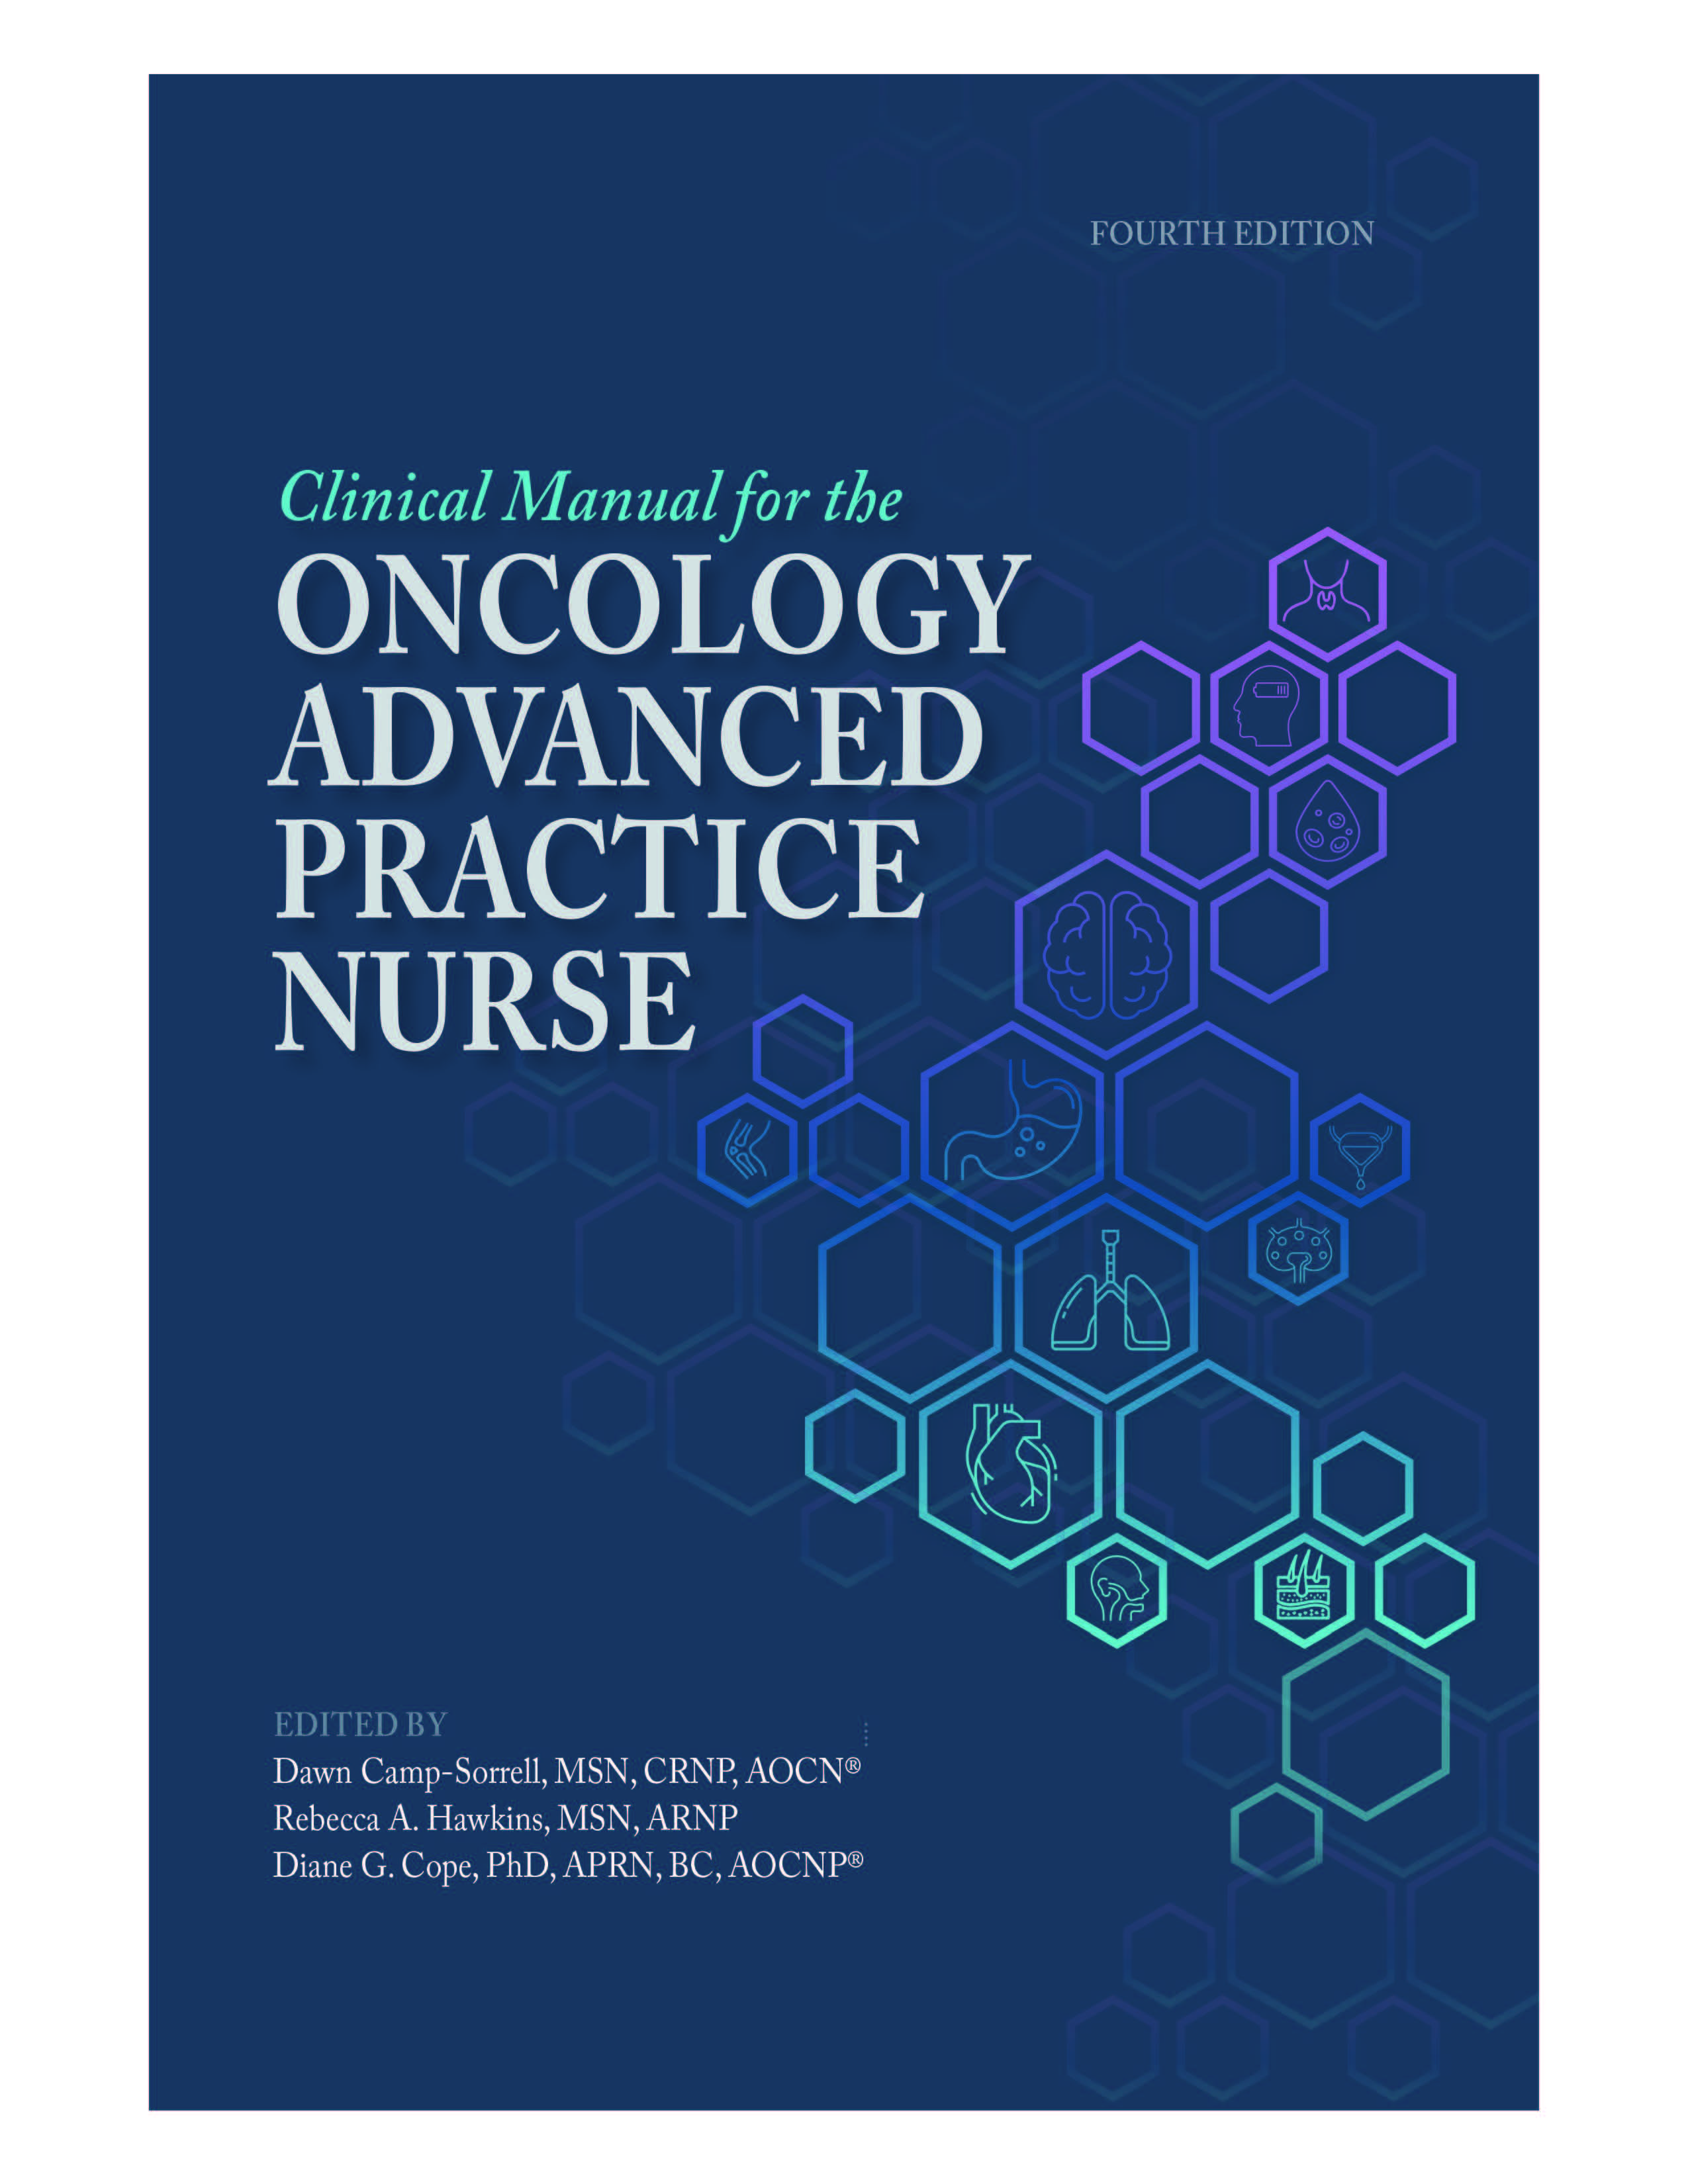 nursing research in oncology